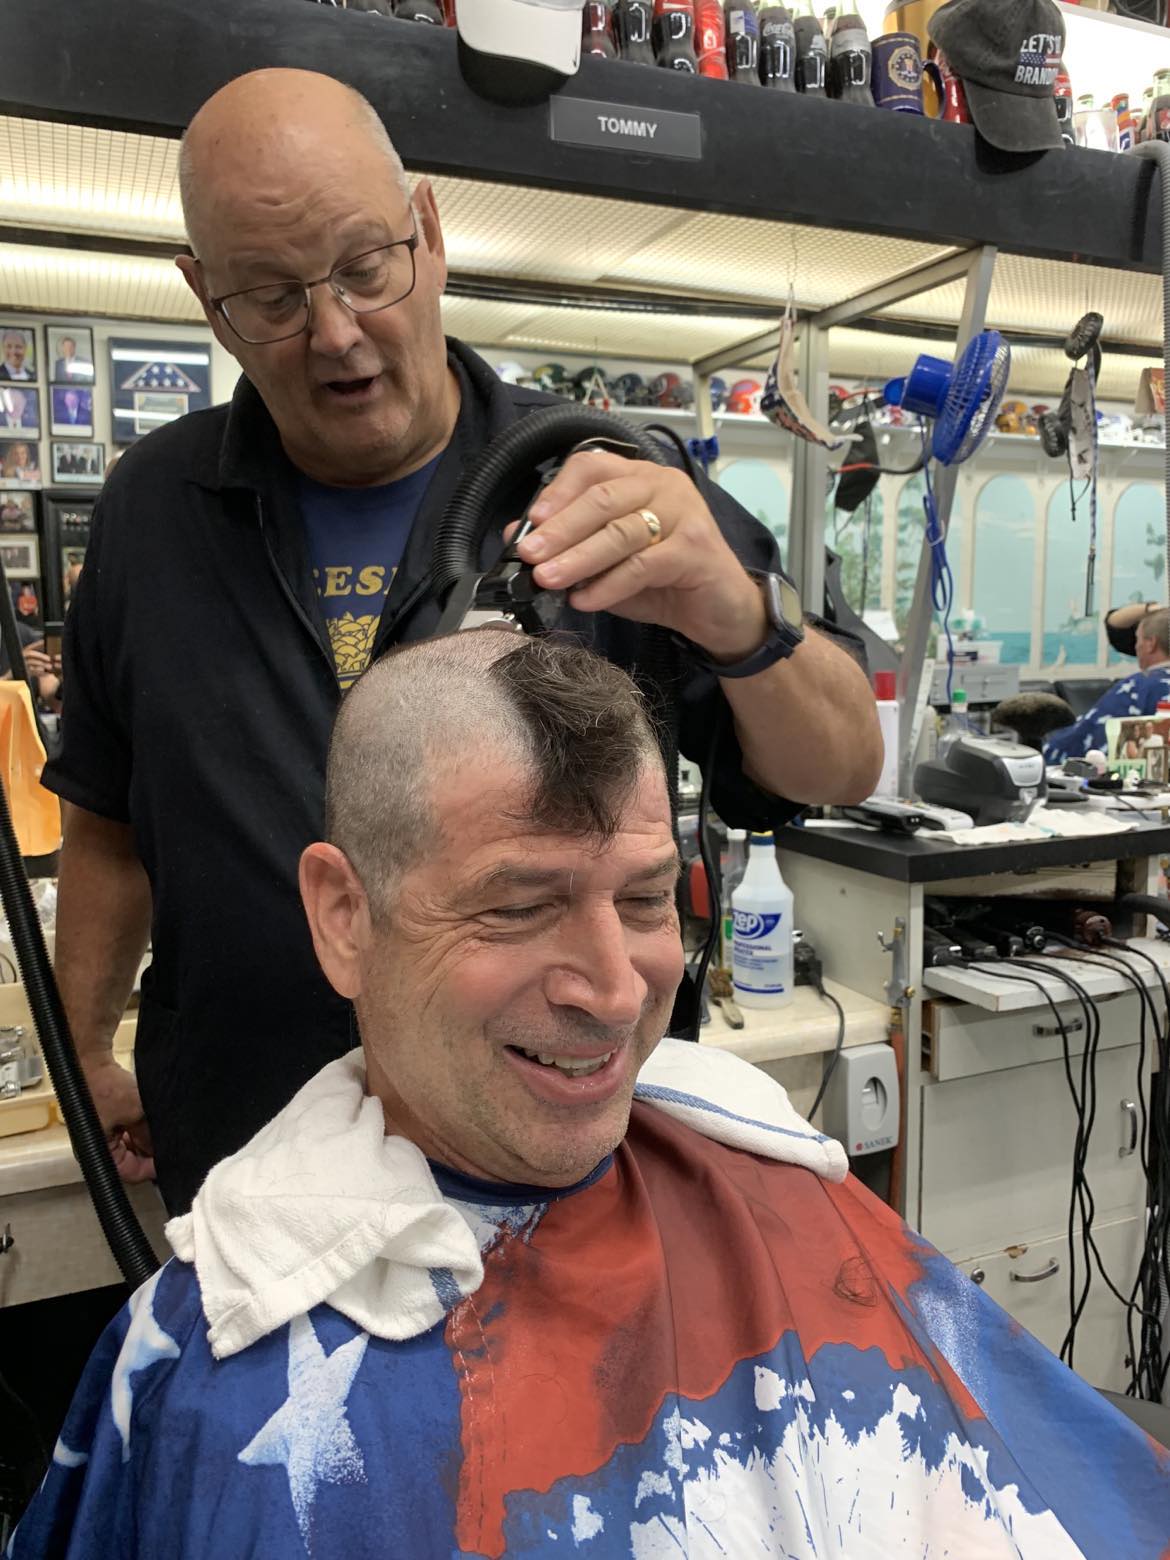 Neill Ferrill at the barber getting his head shaved